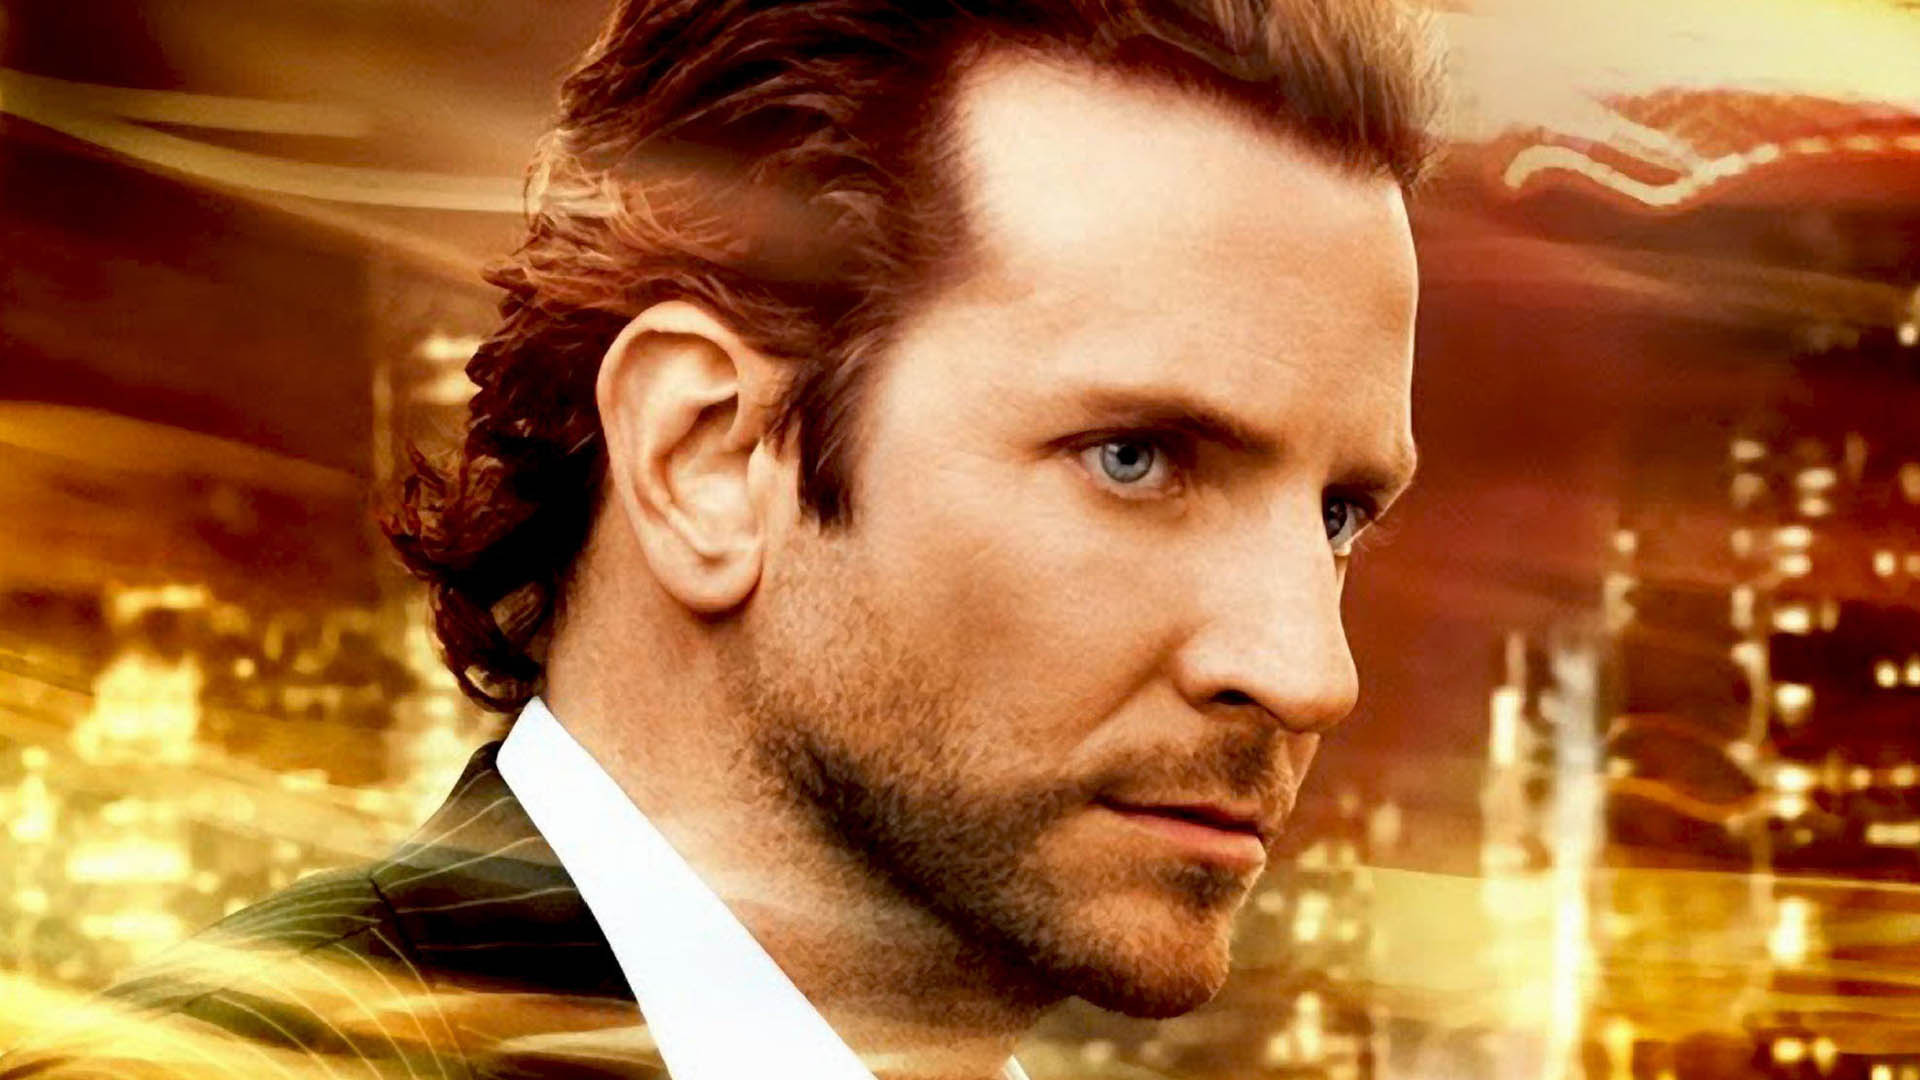 limitless the movie online